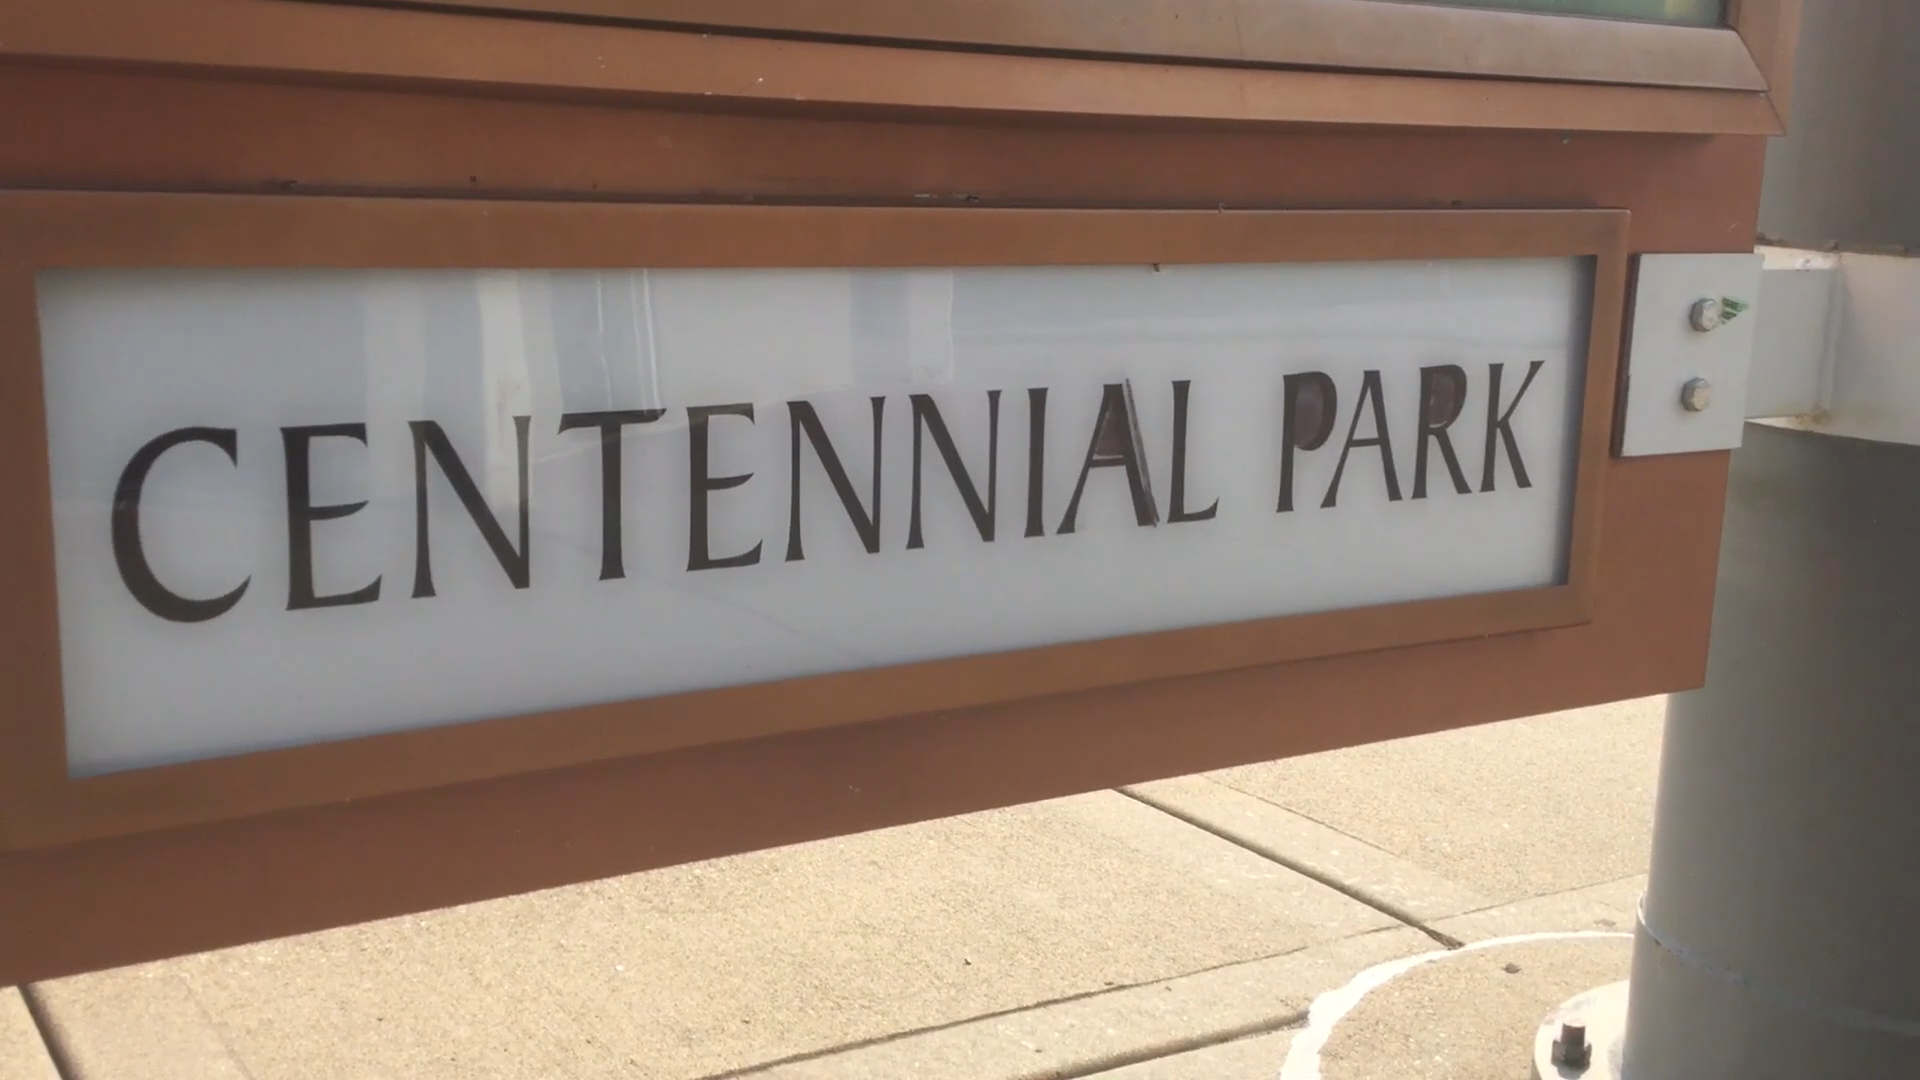 For this Virtual Tour, we're taking a walk through the riverside paths and open fields of Davenport's Centennial Park.